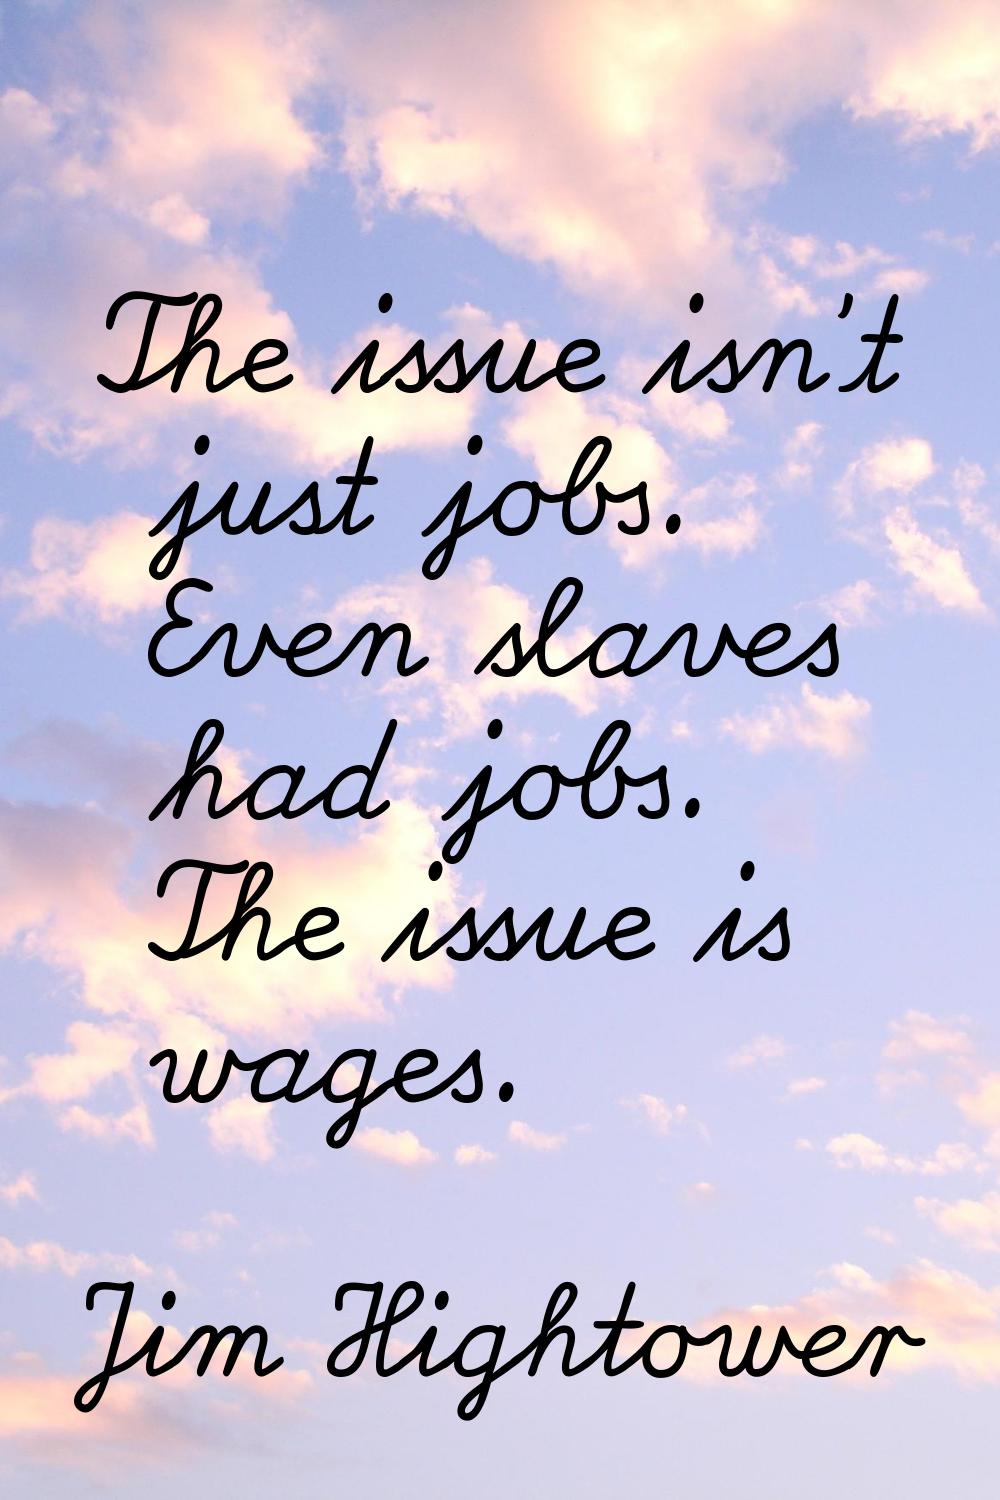 The issue isn't just jobs. Even slaves had jobs. The issue is wages.